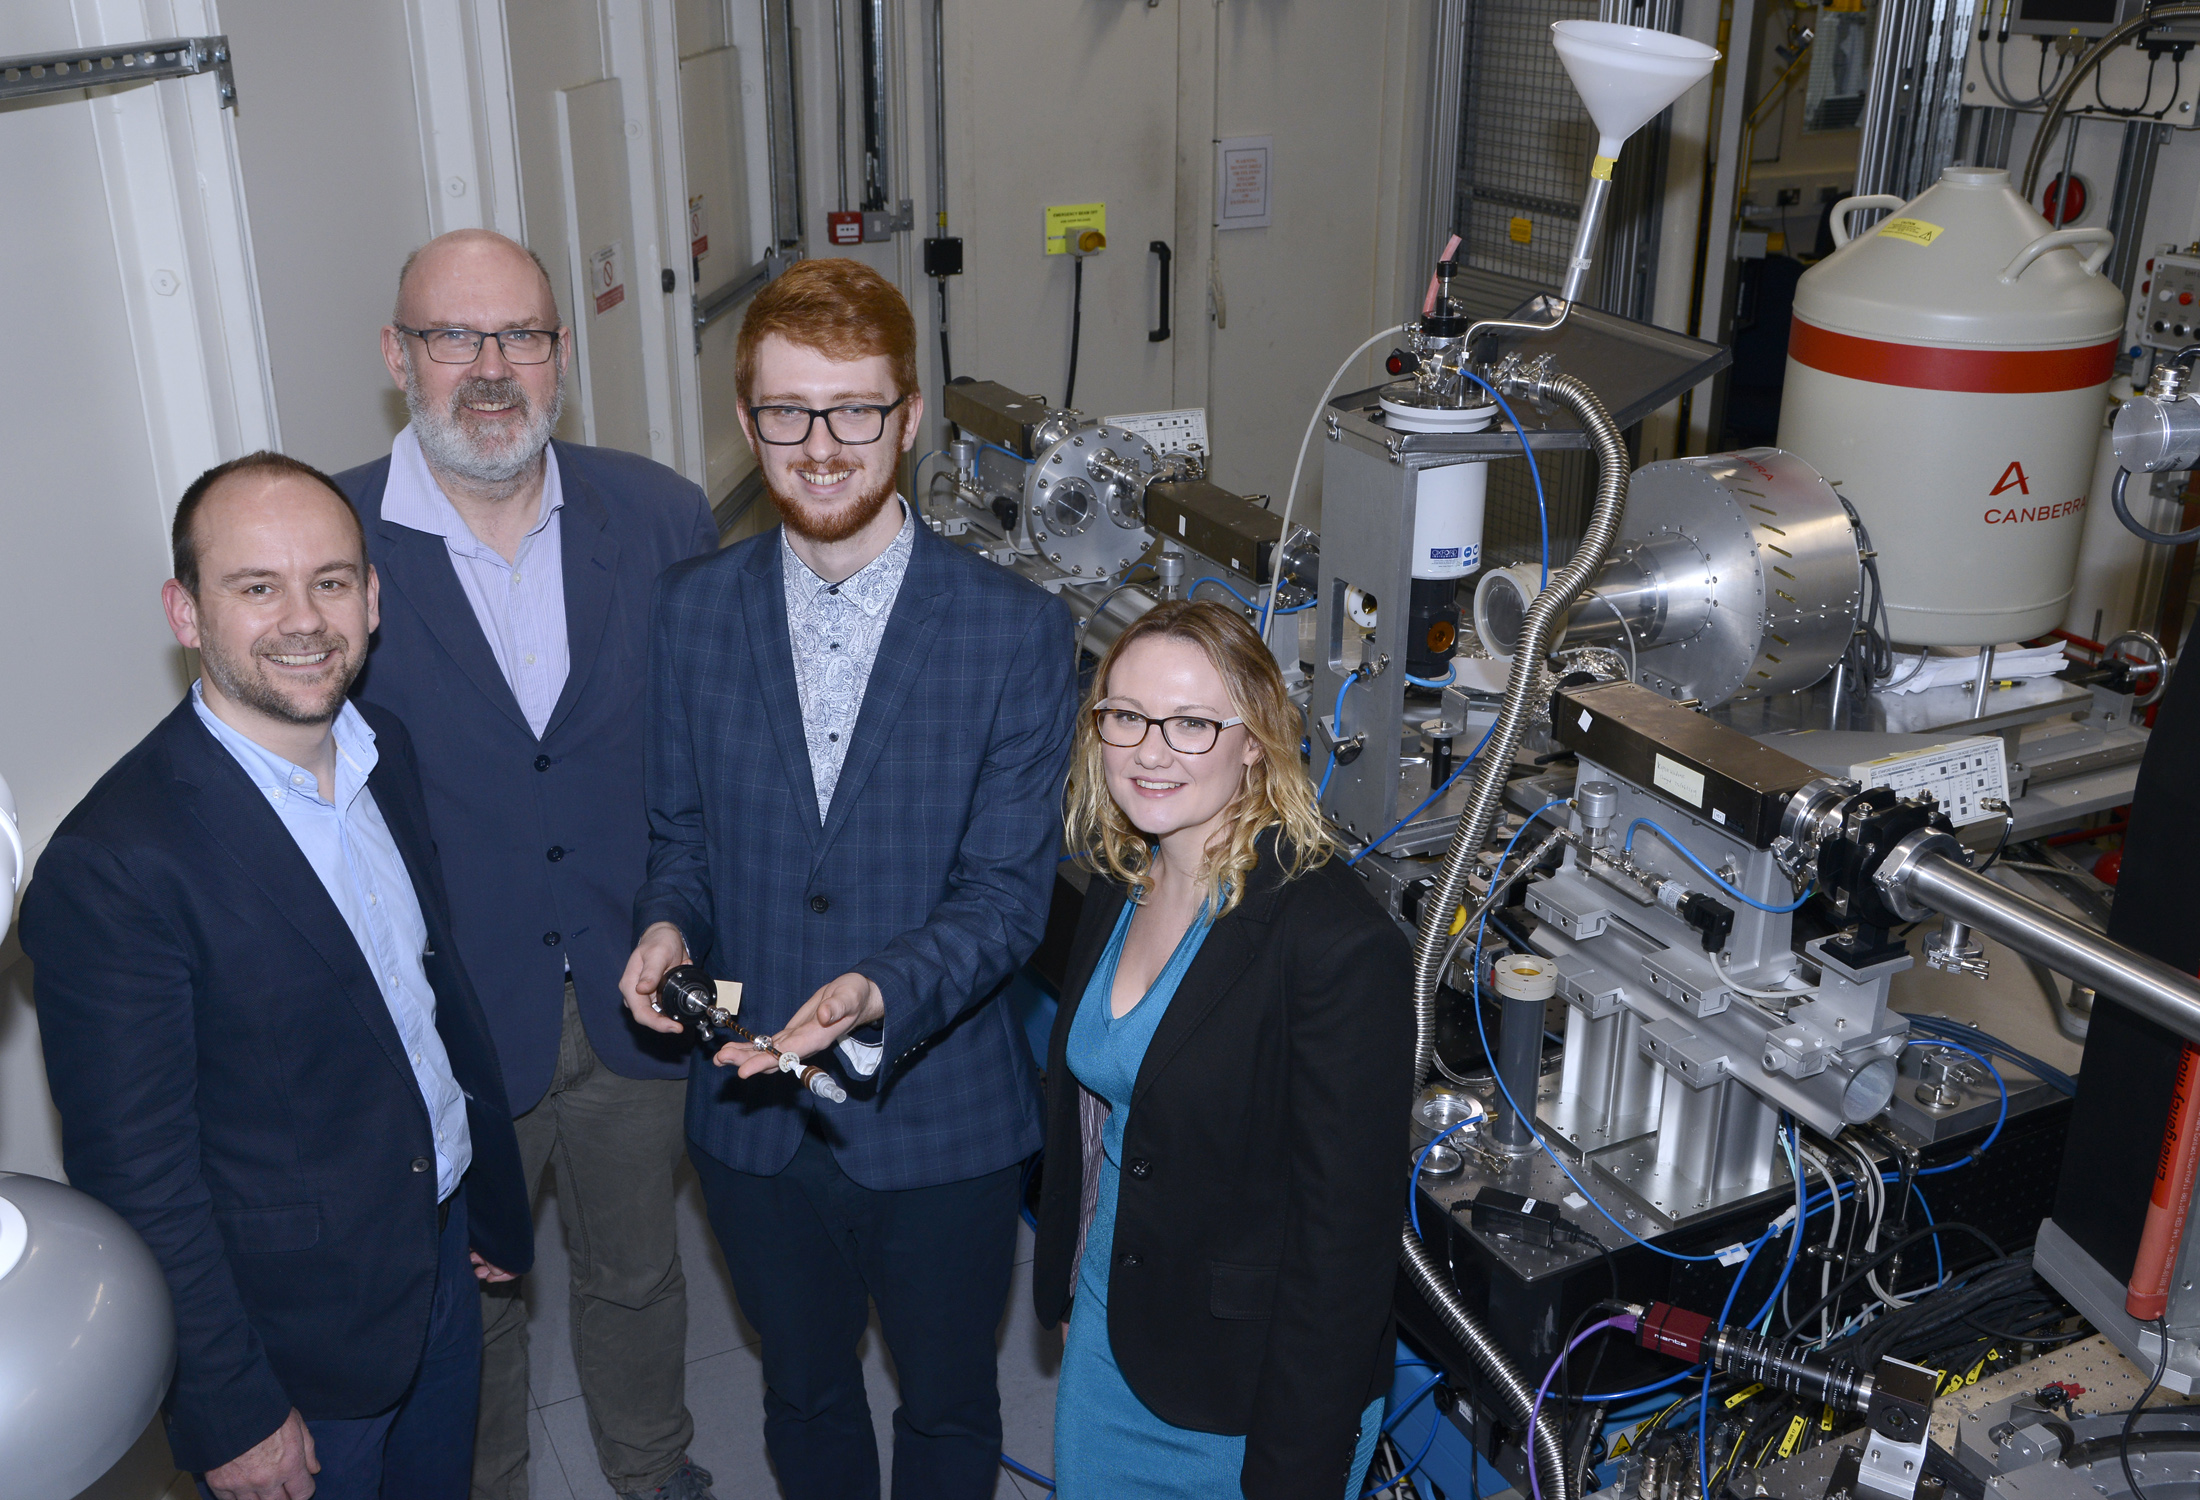 From left to right:  In Diamond’s I20-scanning beamline: Professor Sam Shaw, Co-Investigator and Professor of Environmental Mineralogy at the University of Manchester, Fred Mosselmans, Principal Beamline Scientist at beamline I20, Dr Luke Townsend, Postdoctoral Fellow in Environmental Radiochemistry at The University of Manchester holding a sample, and Dr Rosemary Hibberd, Senior Research Manager, Radioactive Waste Management